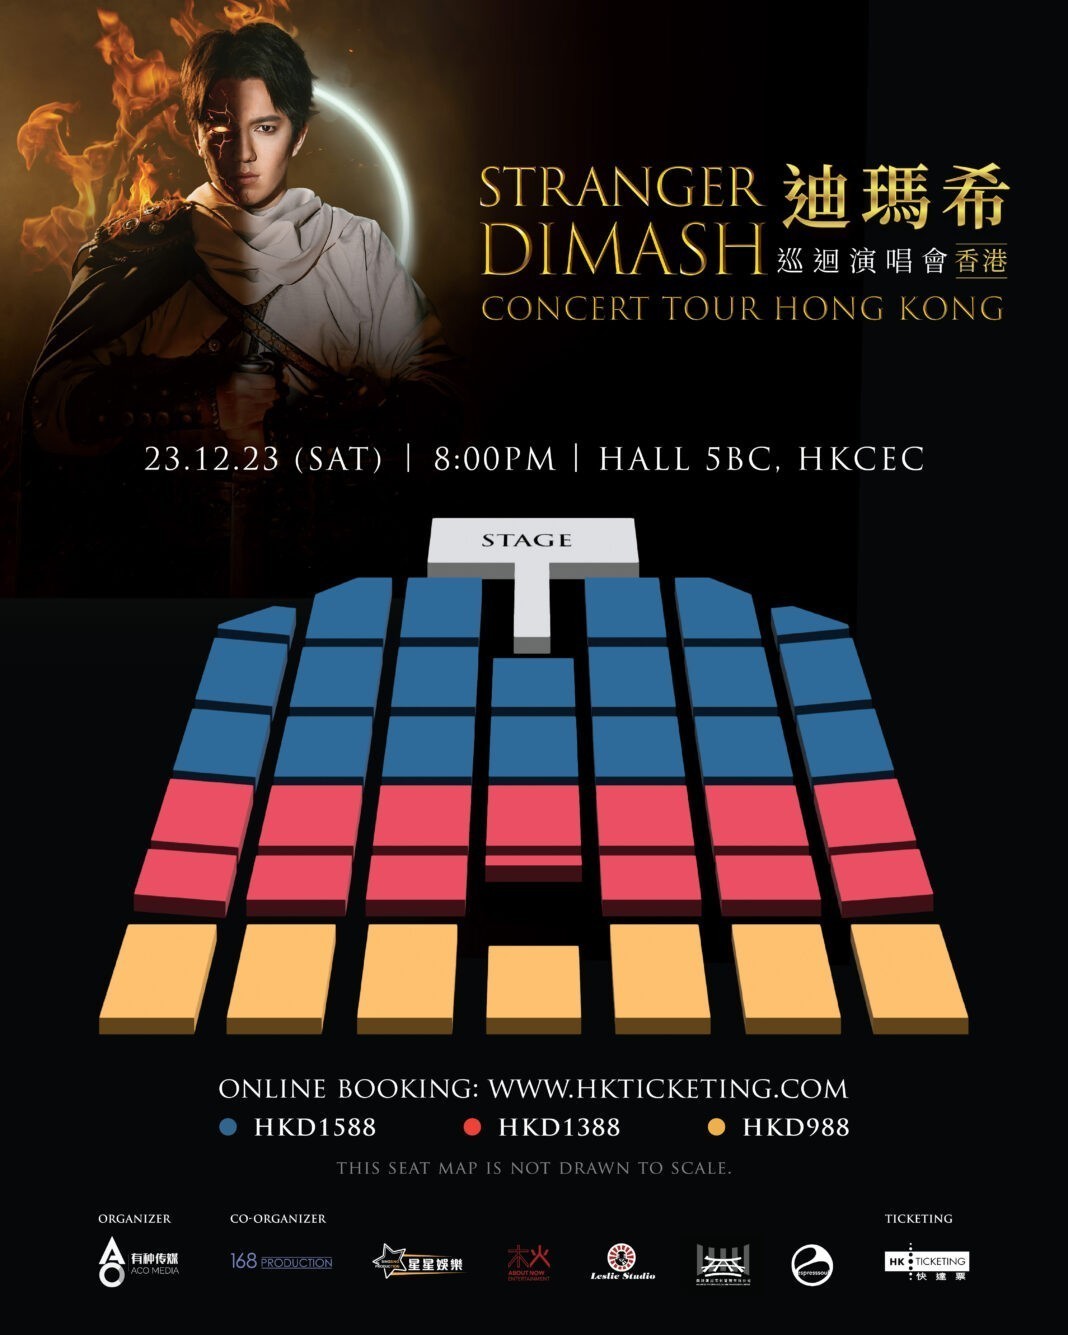 Information about the start of ticket sales for Dimash's solo concert in Hong Kong